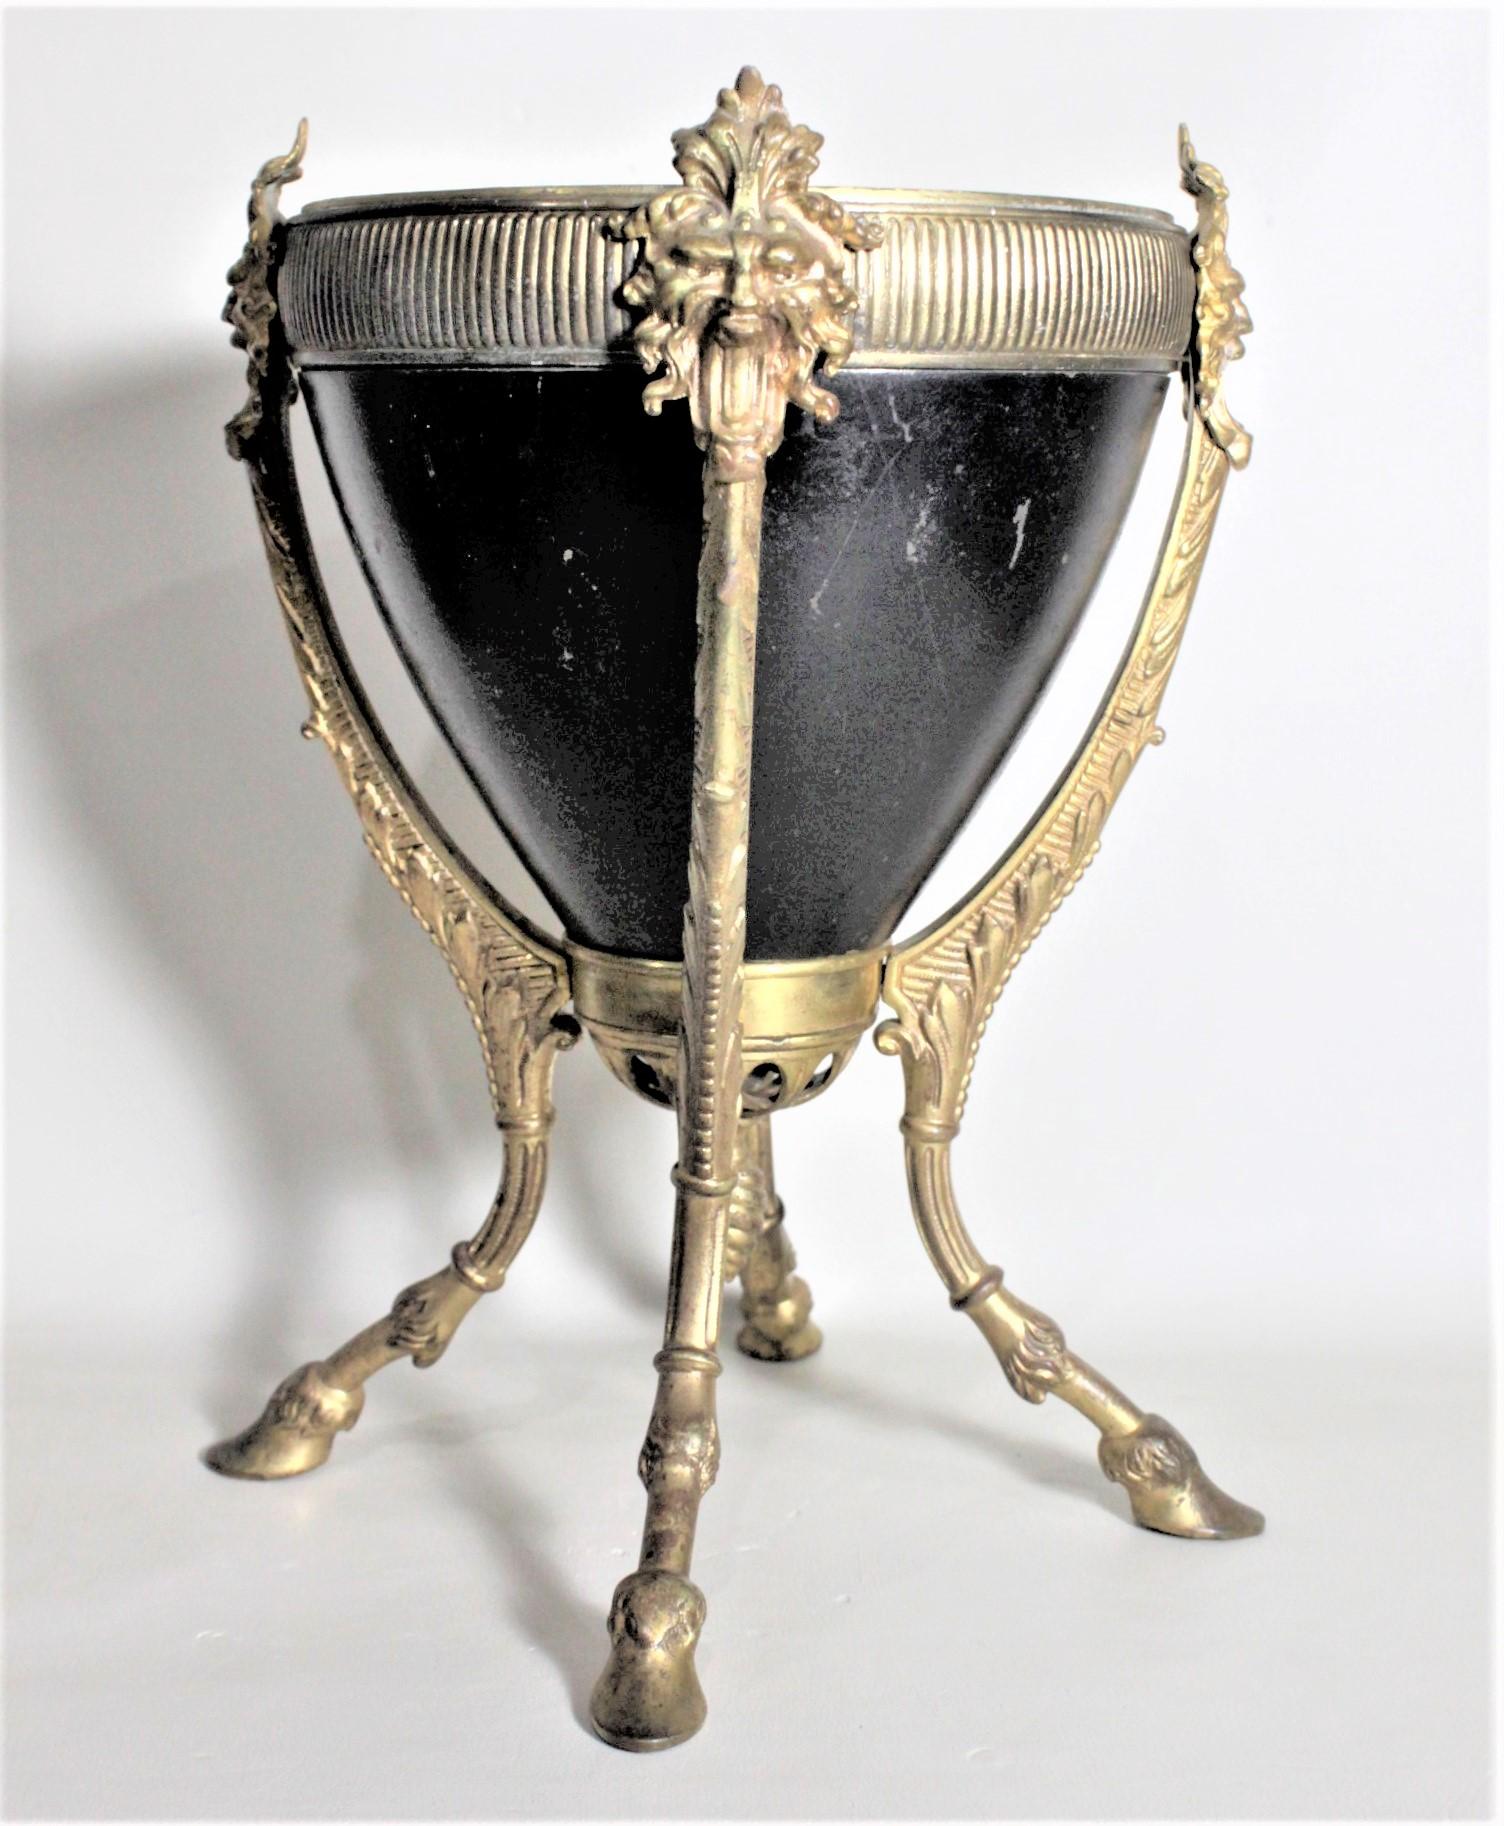 This antique gilt bronze and cast iron jardinière is unsigned, but presumed to have been made in France in approximately 1900 This planter is done with a conical shaped cast iron pot which has been cold-painted a glossy black, and a very ornate cast